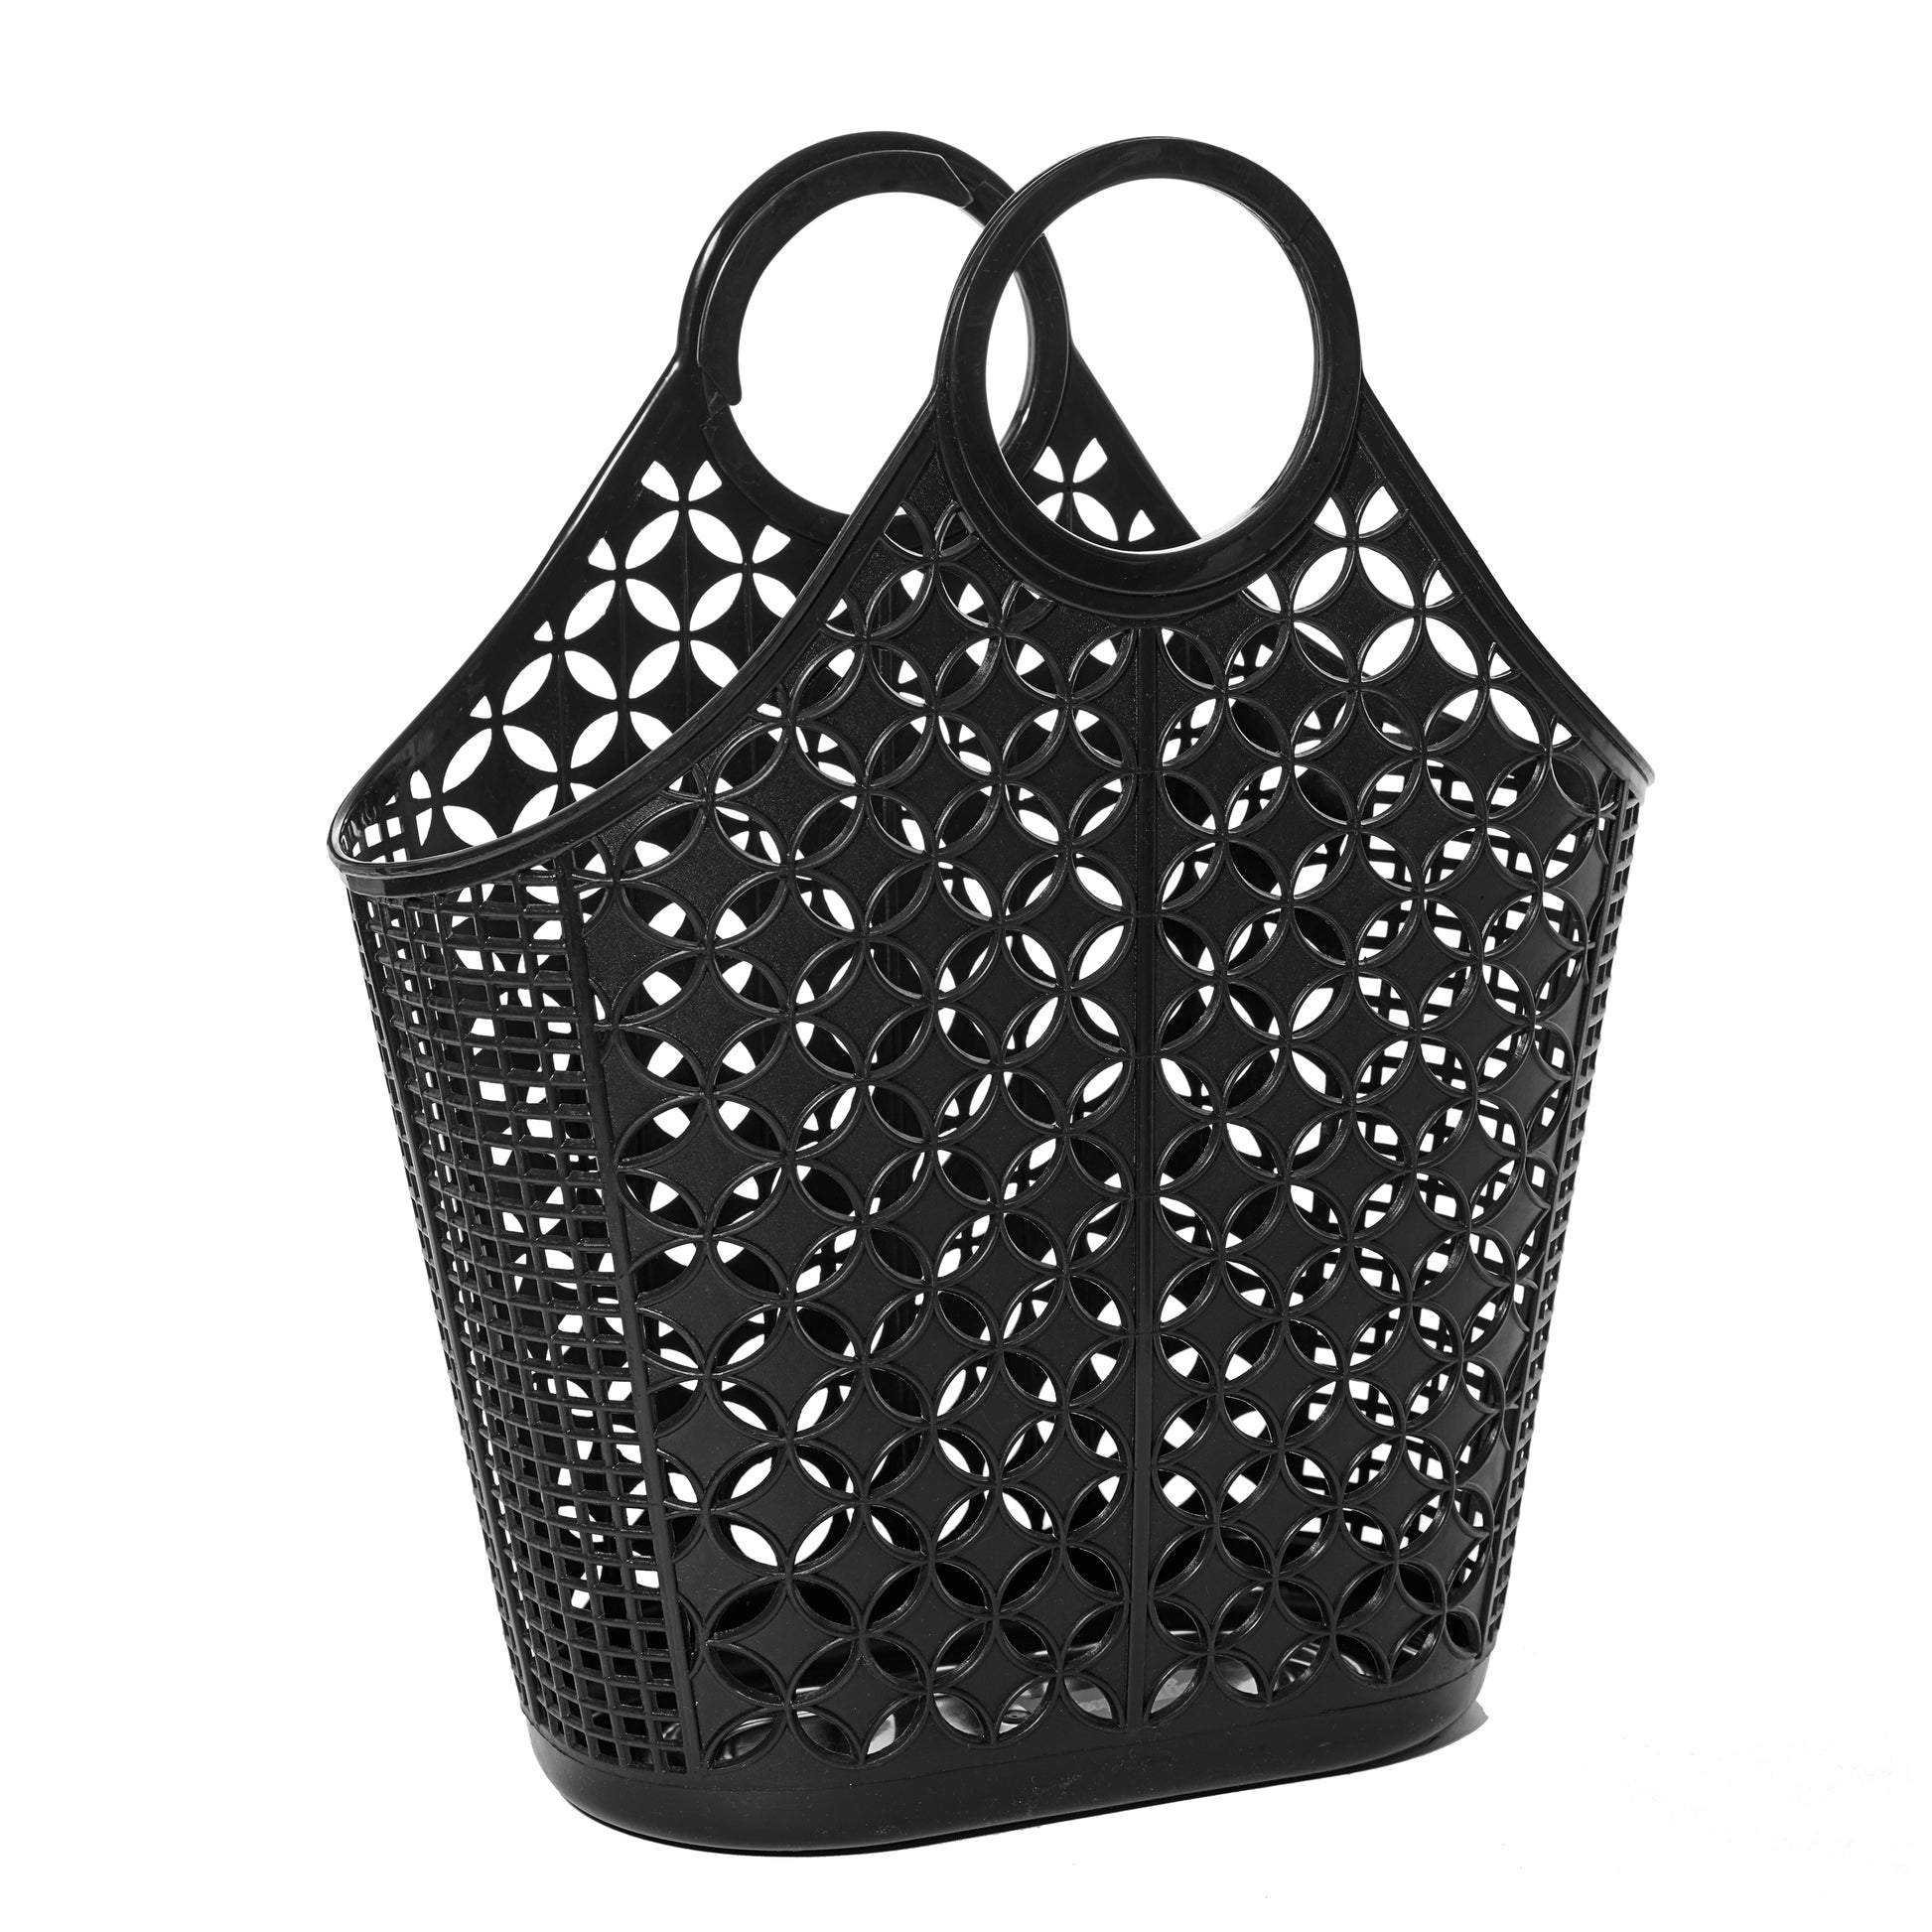 Black Sun Jellies Atomic Tote, Vintage style market style tote perfect for the Beach or the Shops